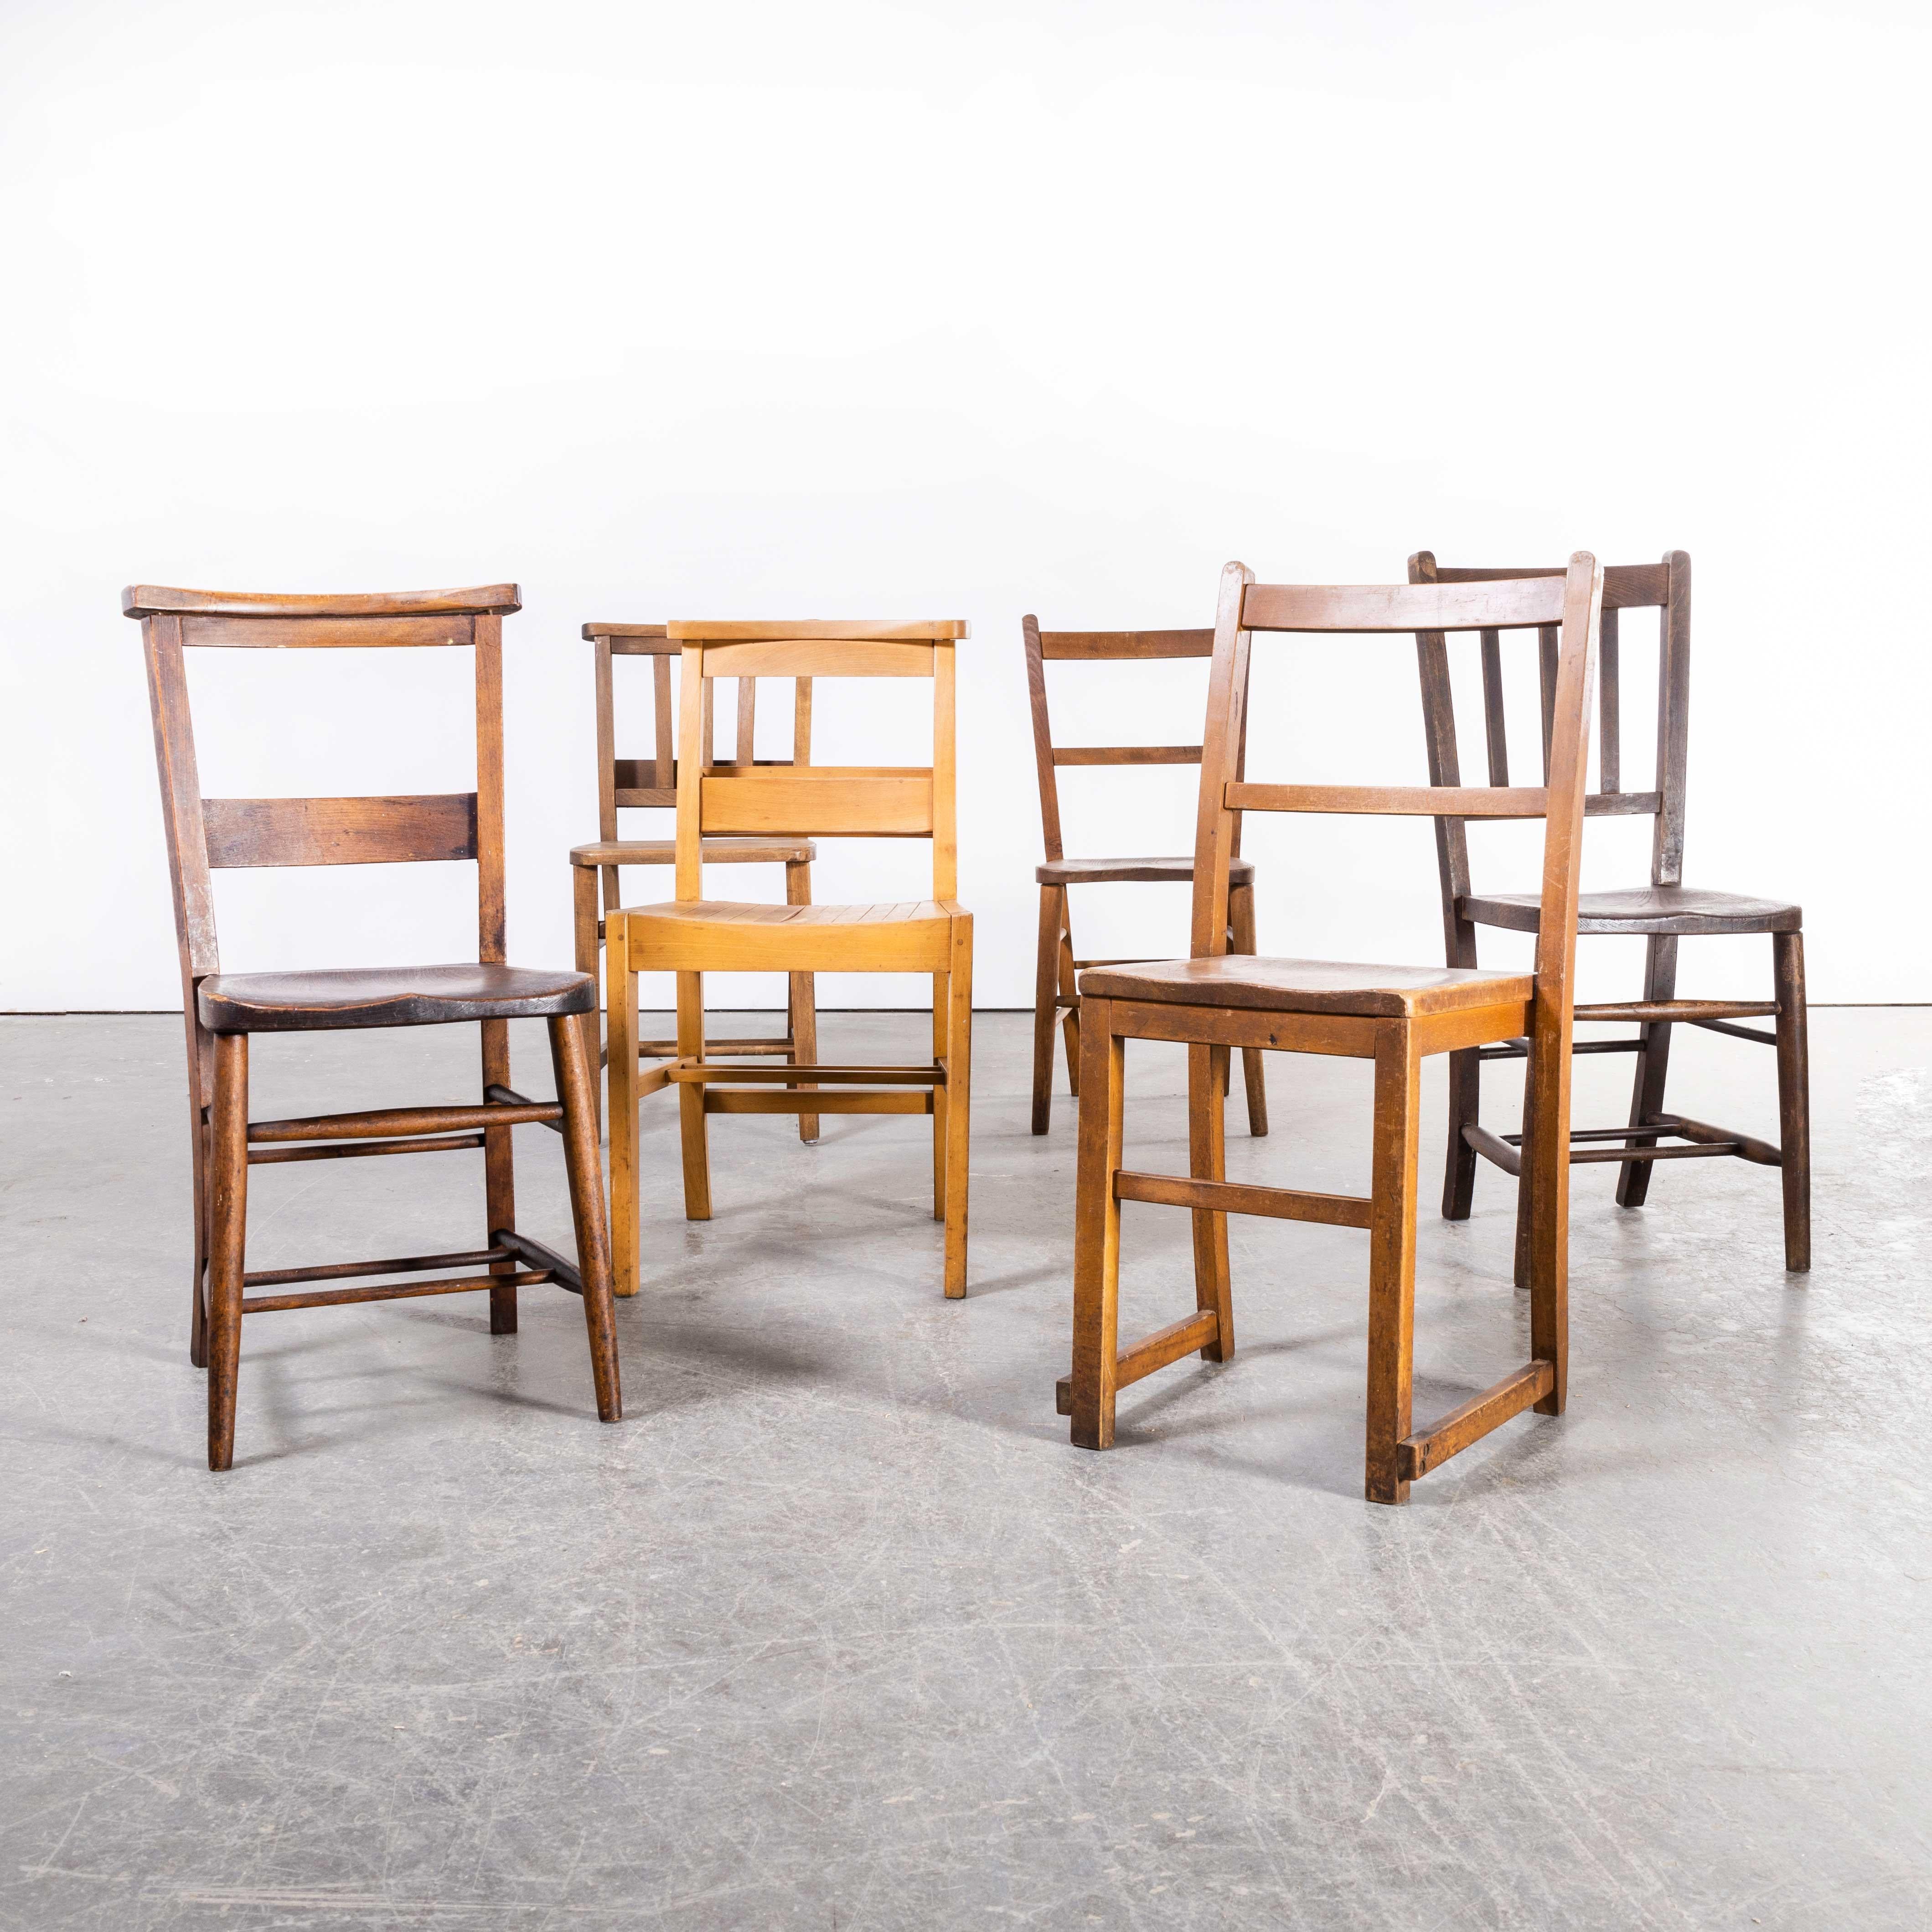 1960s Elm and ash church – chapel dining chairs – harlequin set of six
1960s Elm and ash church – chapel dining chairs – harlequin set of six. England has a wonderfully rich heritage for making chairs. At the height of production at the turn of the